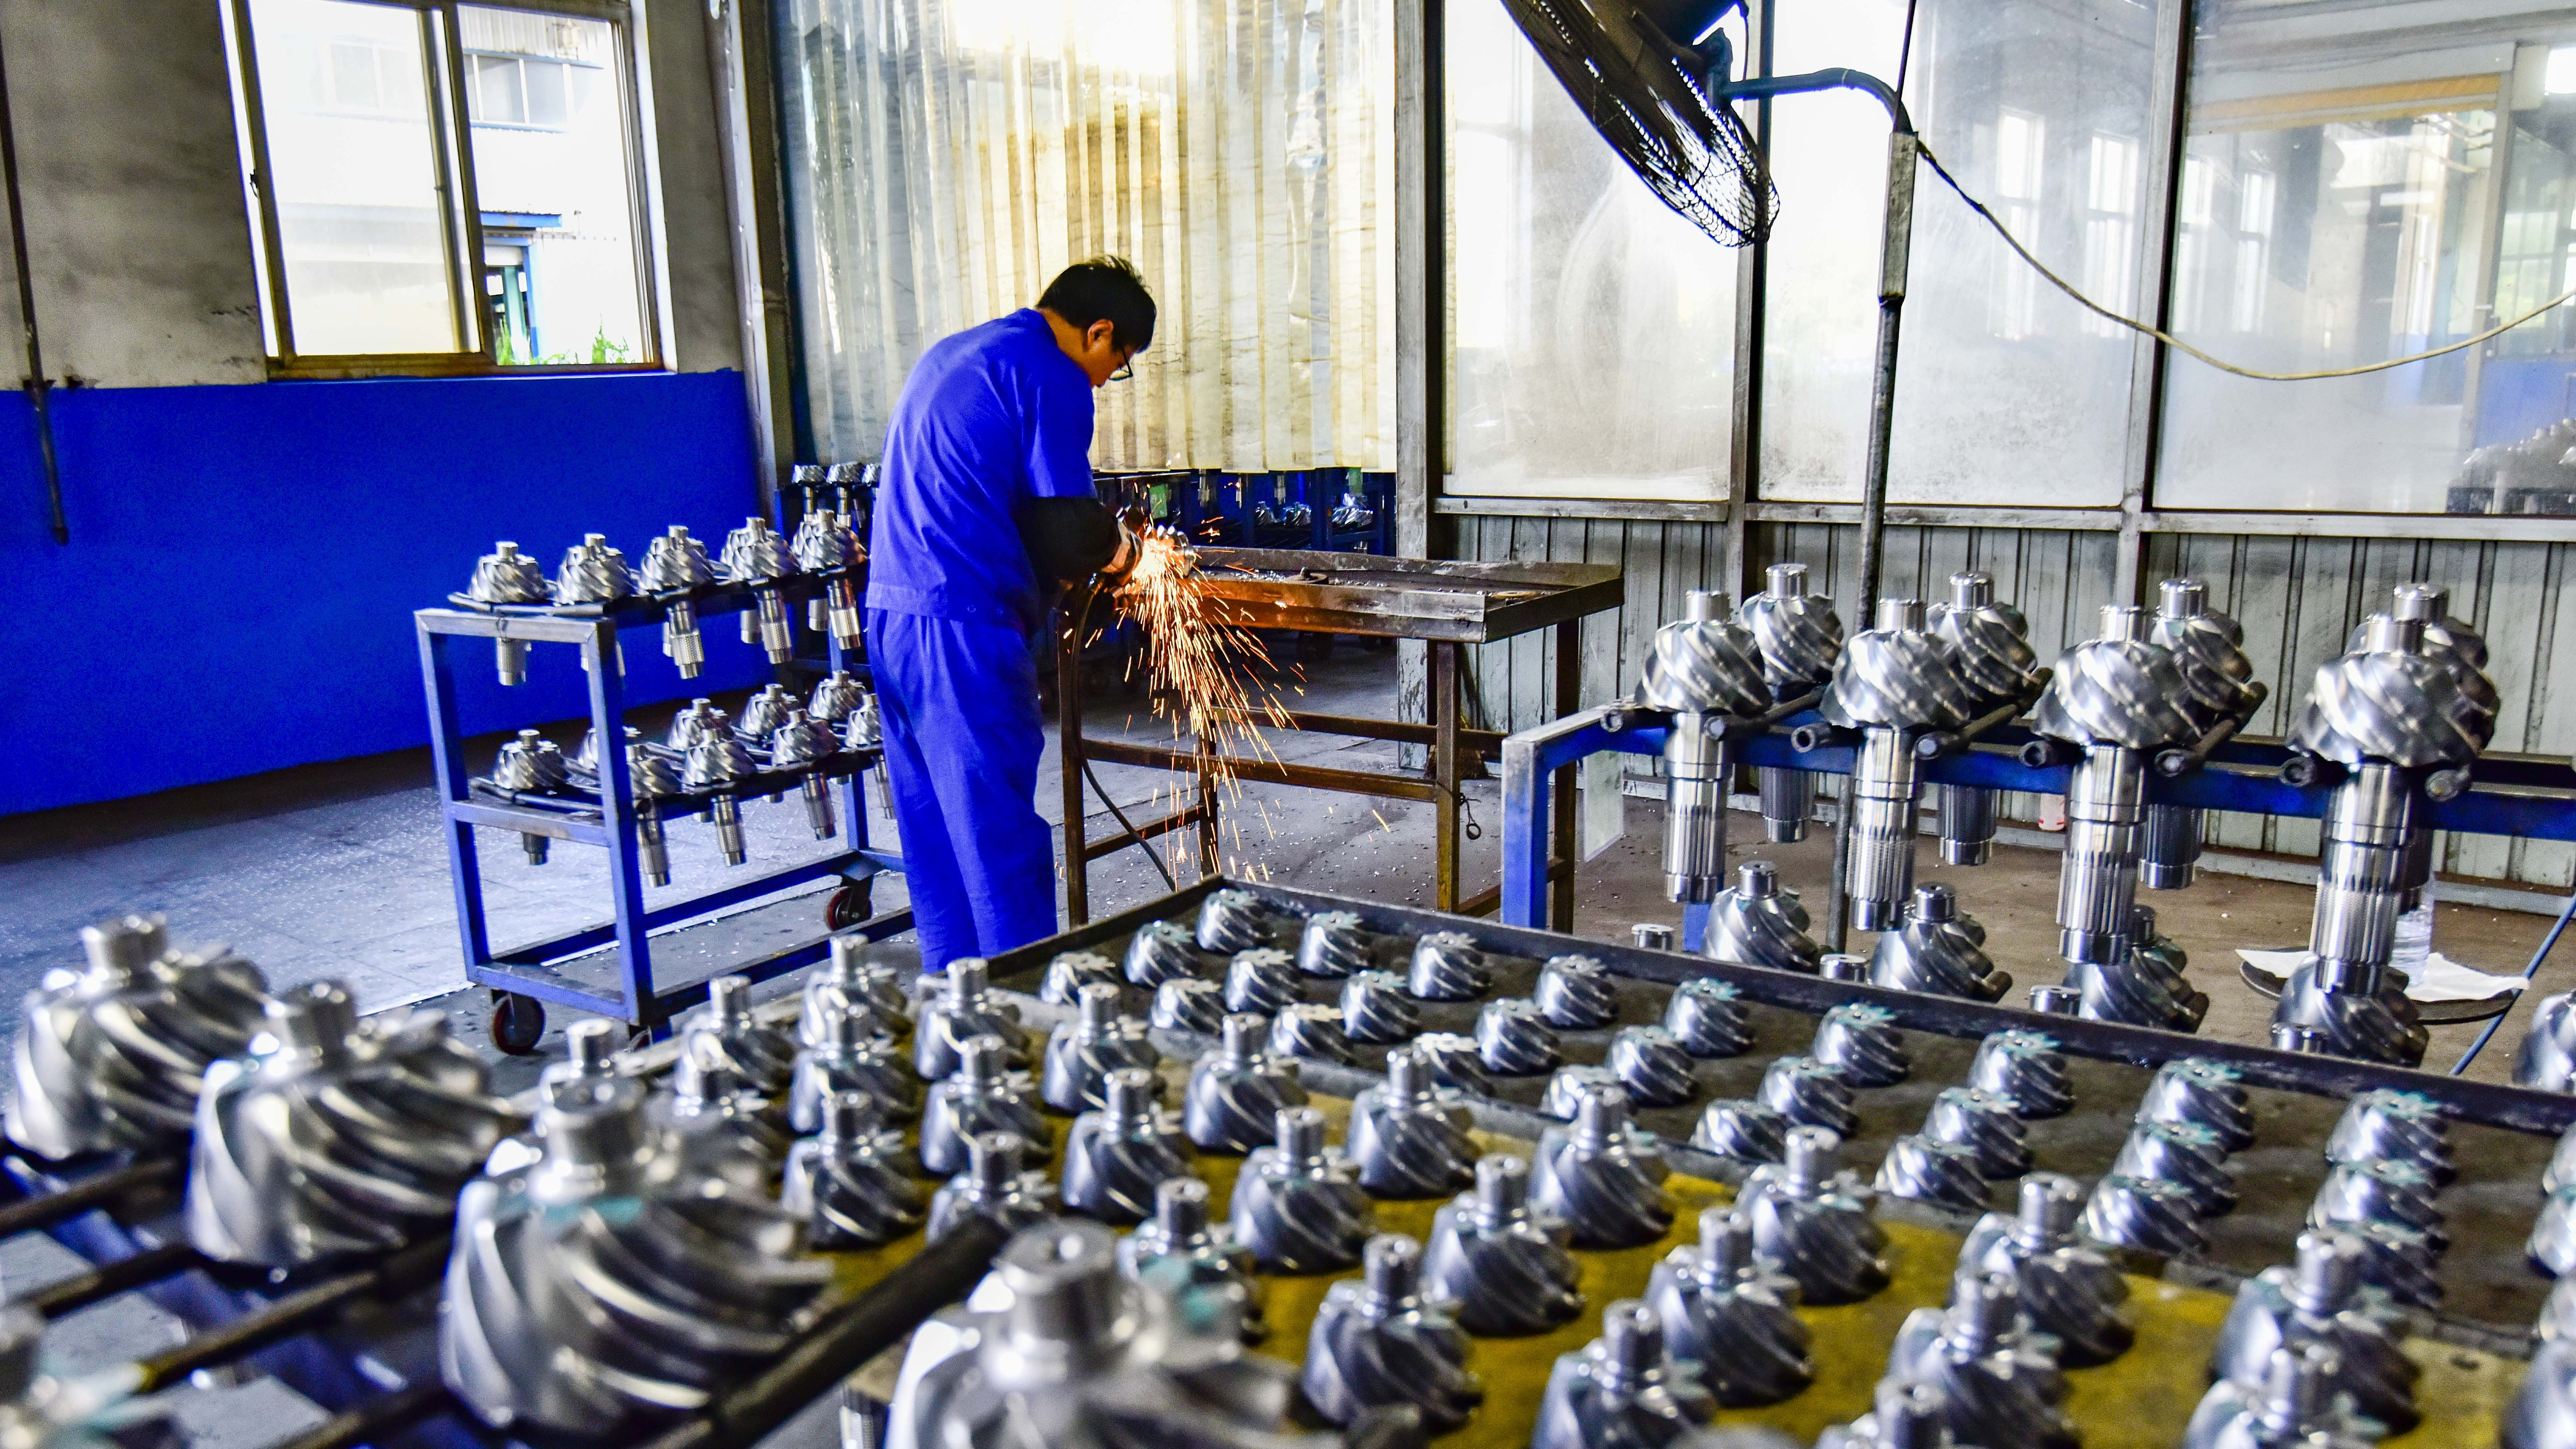 An employee processes products at a gear manufacturing enterprise in Qingzhou Economic Development Zone, Qingzhou City, east China's Shandong Province, September 30, 2023. /CFP